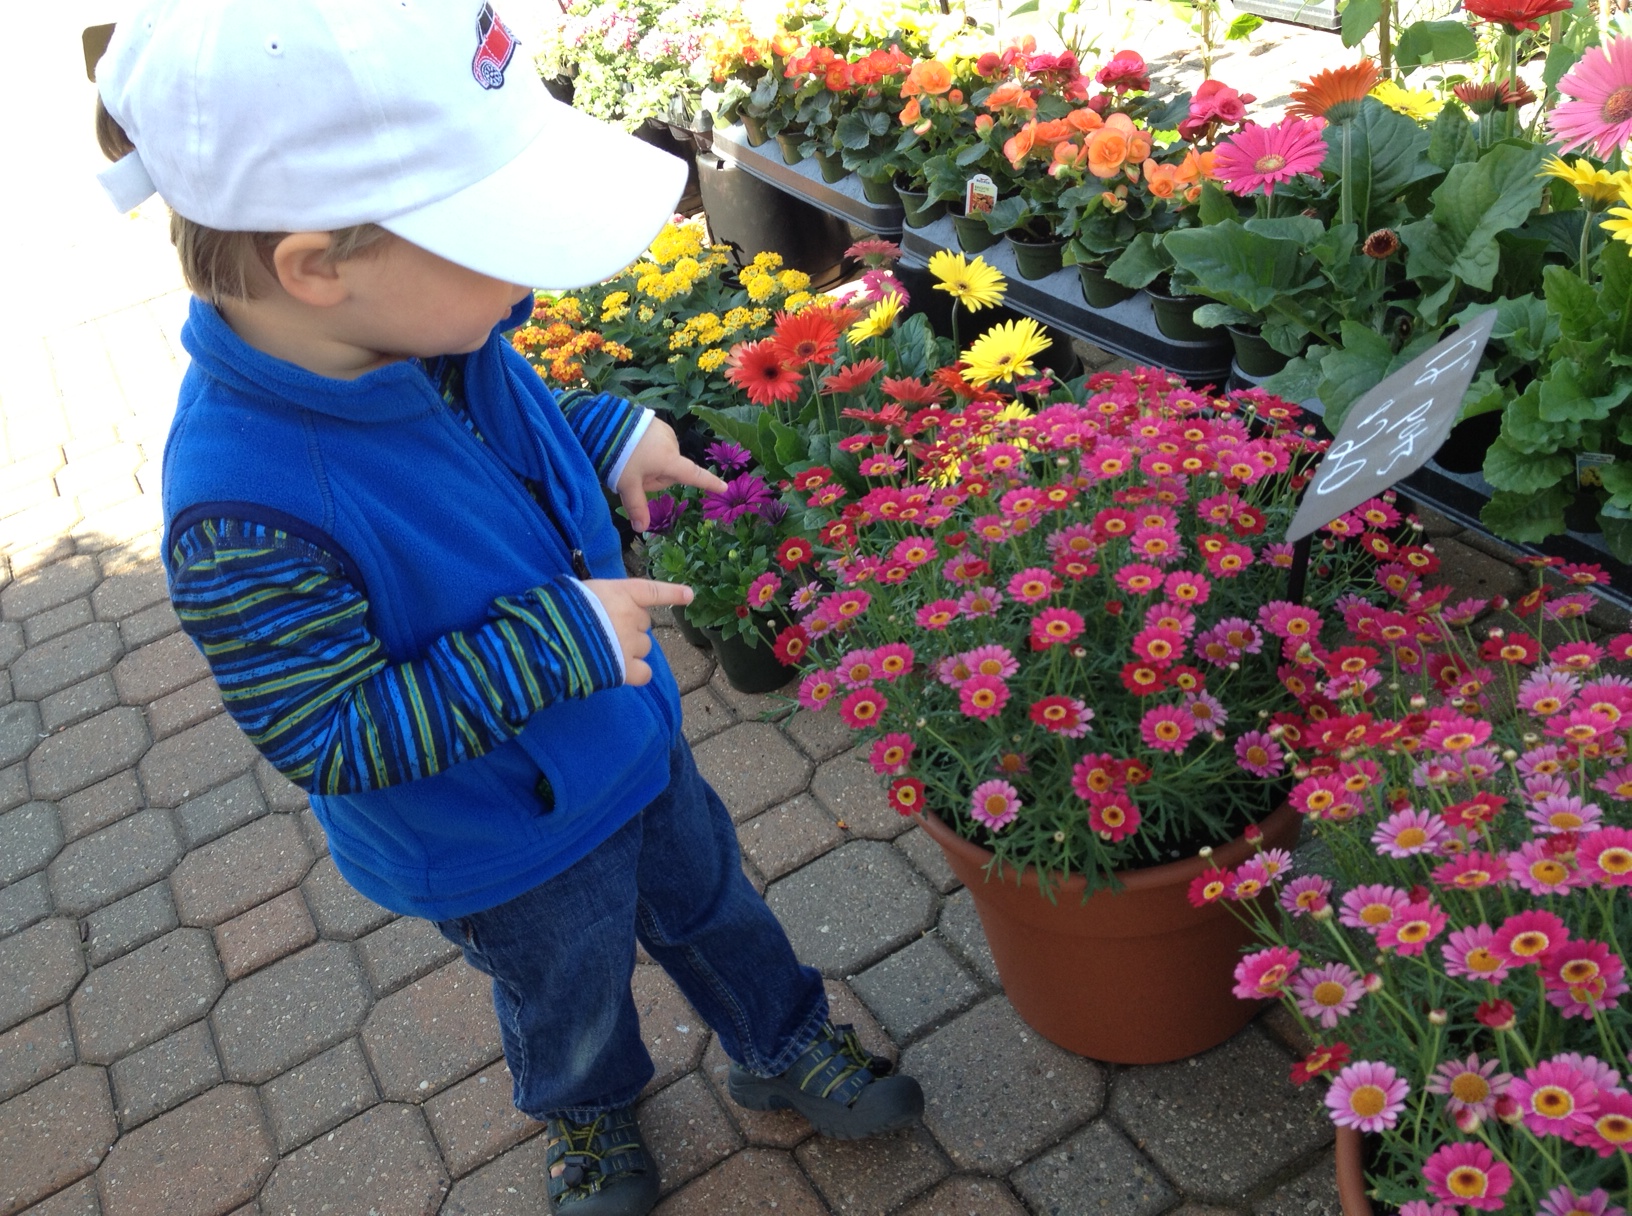 this was actually taken the other day, but h was up to the same delightful antics at today's market--pointing out all of the beautiful flowers and exploring to his heart's content. if anyone can tell me what those little pink beauties are, i'd be so grateful...love them and want them to fill up the yard!